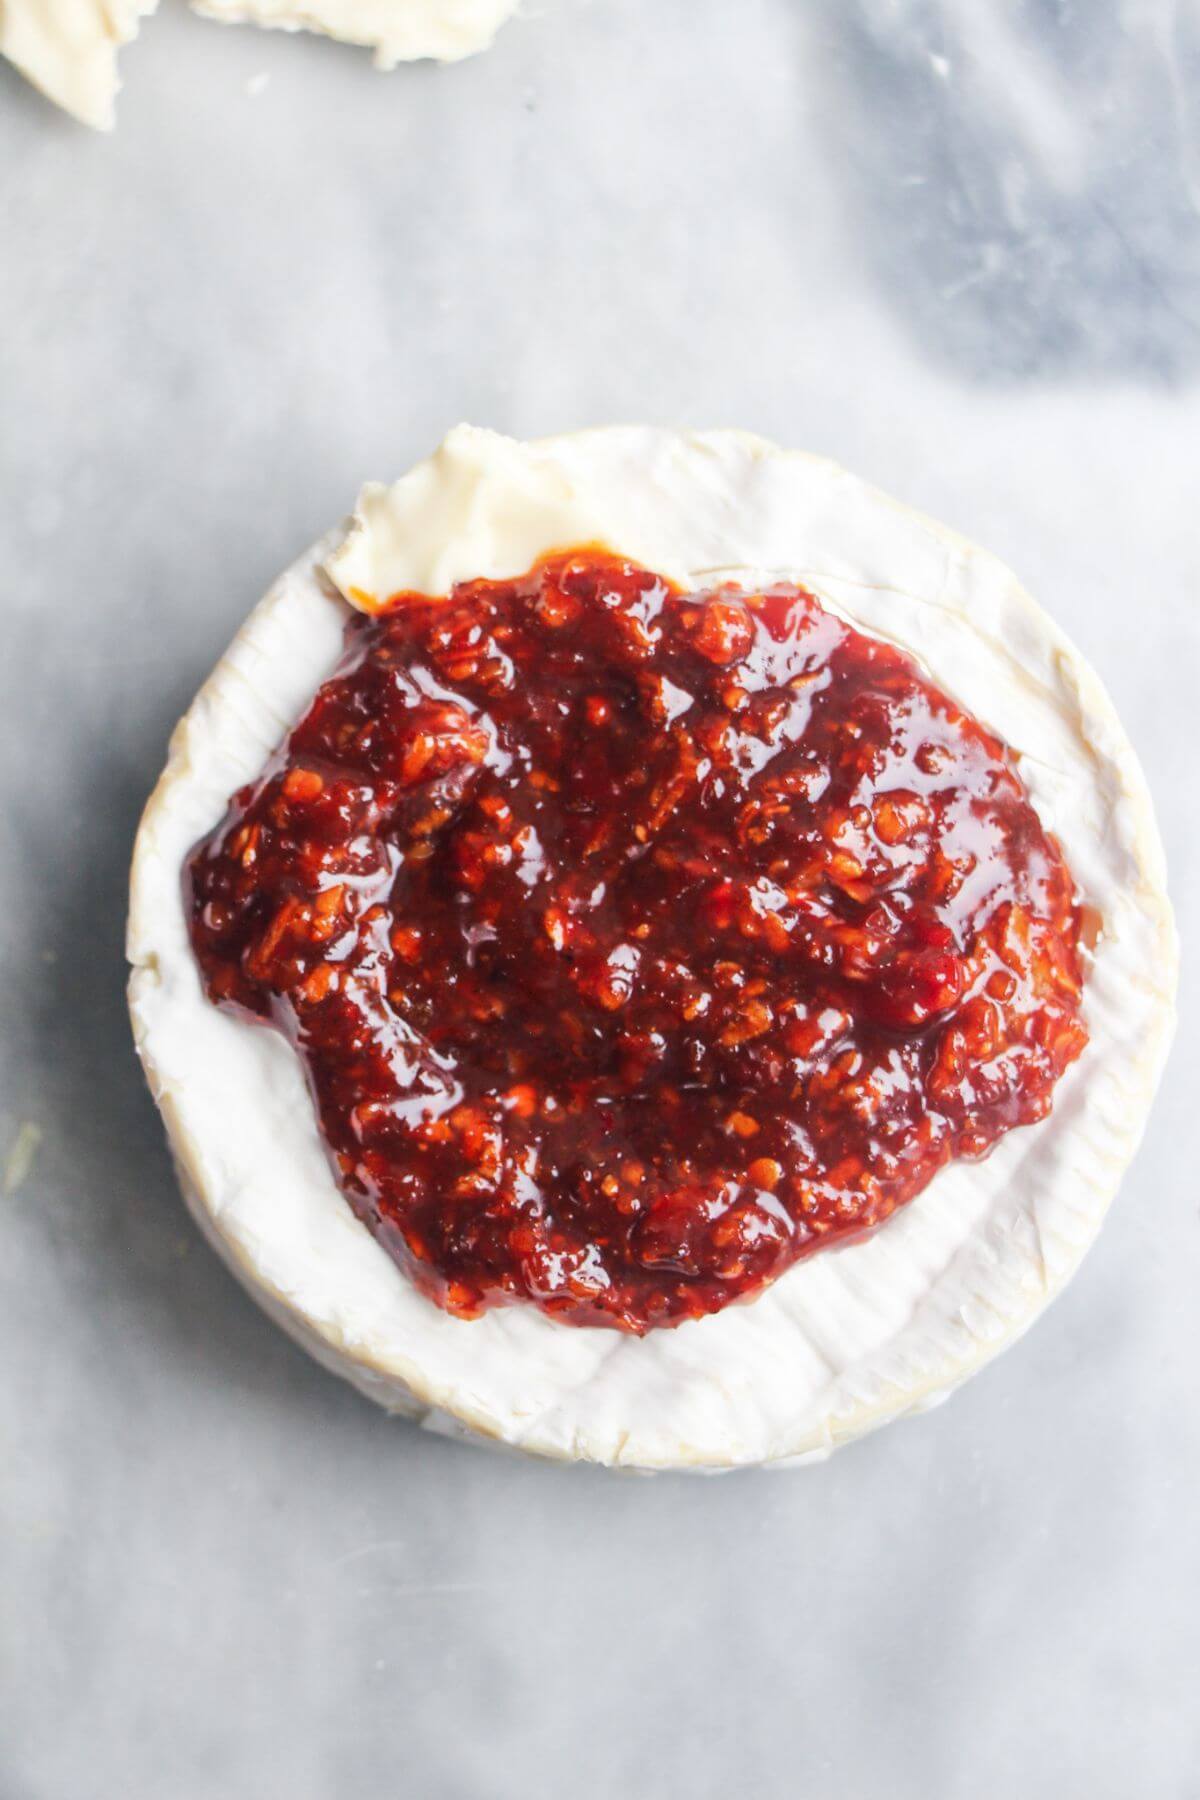 Honey and harissa sauce piled on top of small round of camembert on a grey marble background.